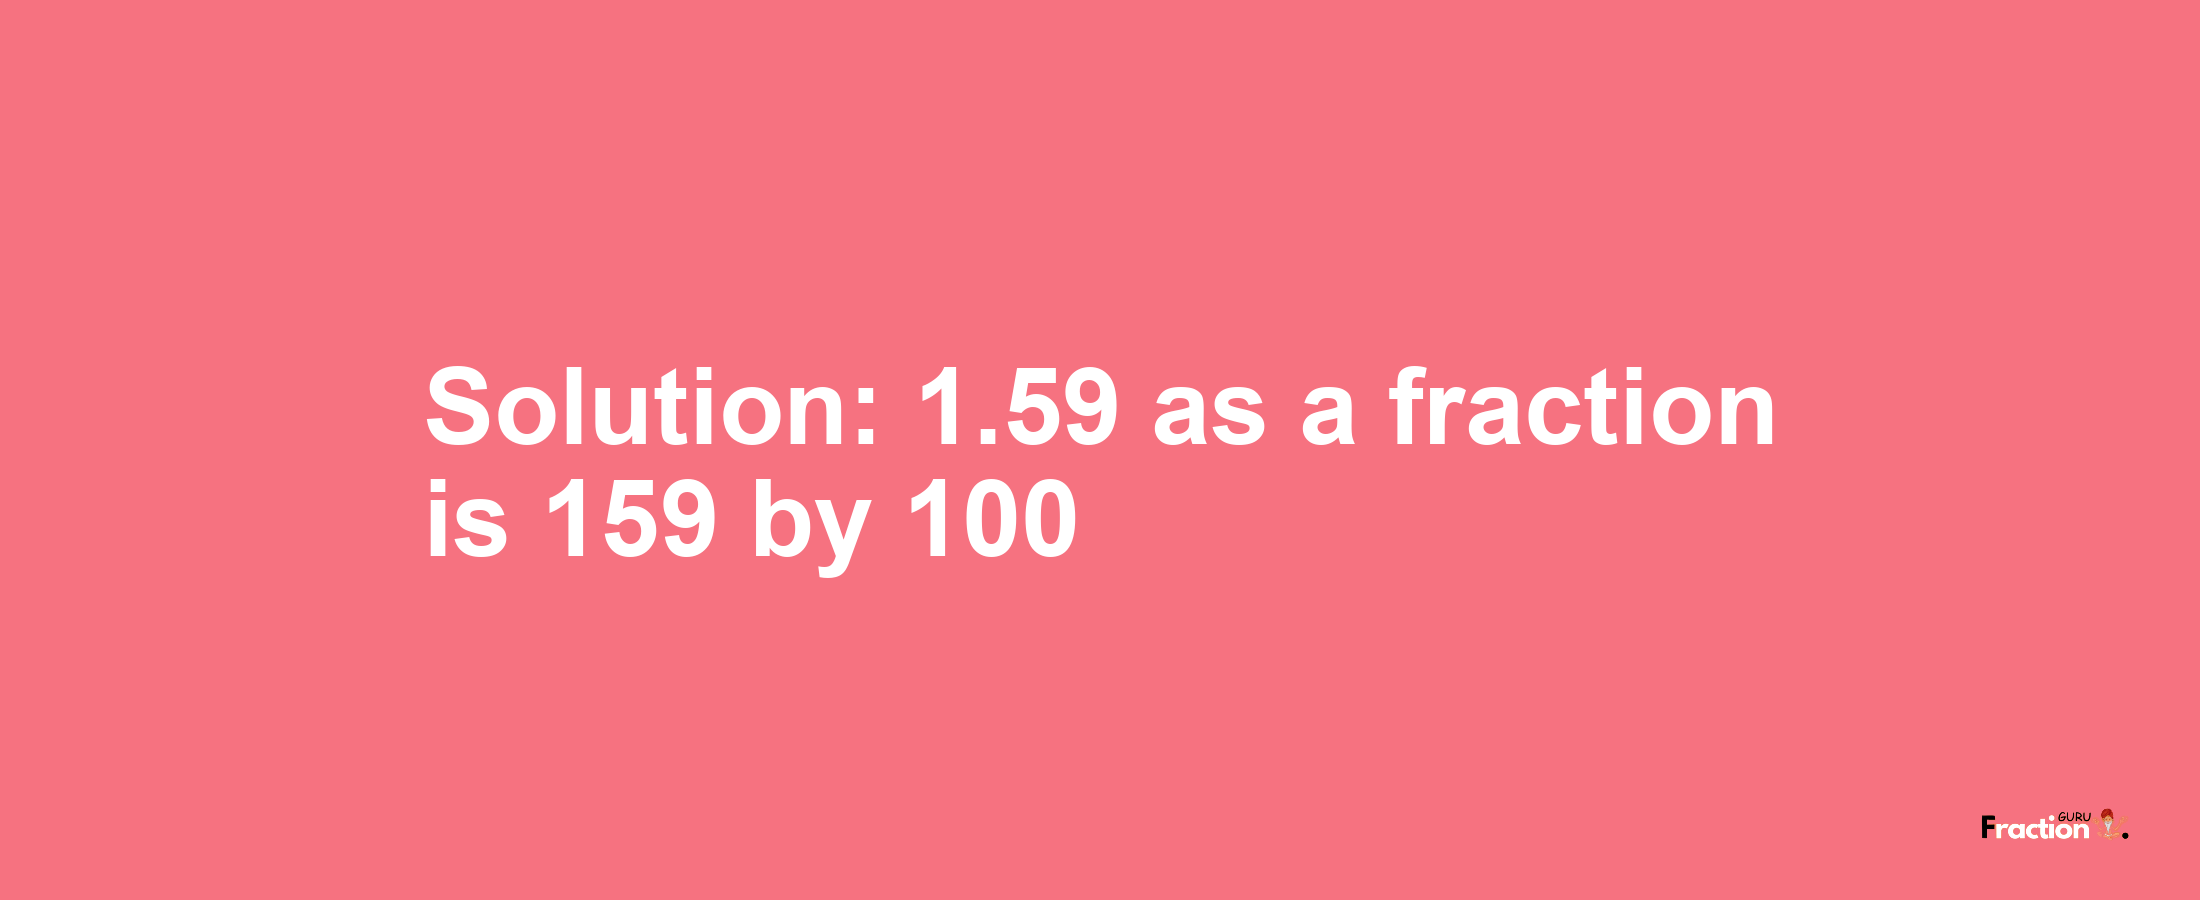 Solution:1.59 as a fraction is 159/100